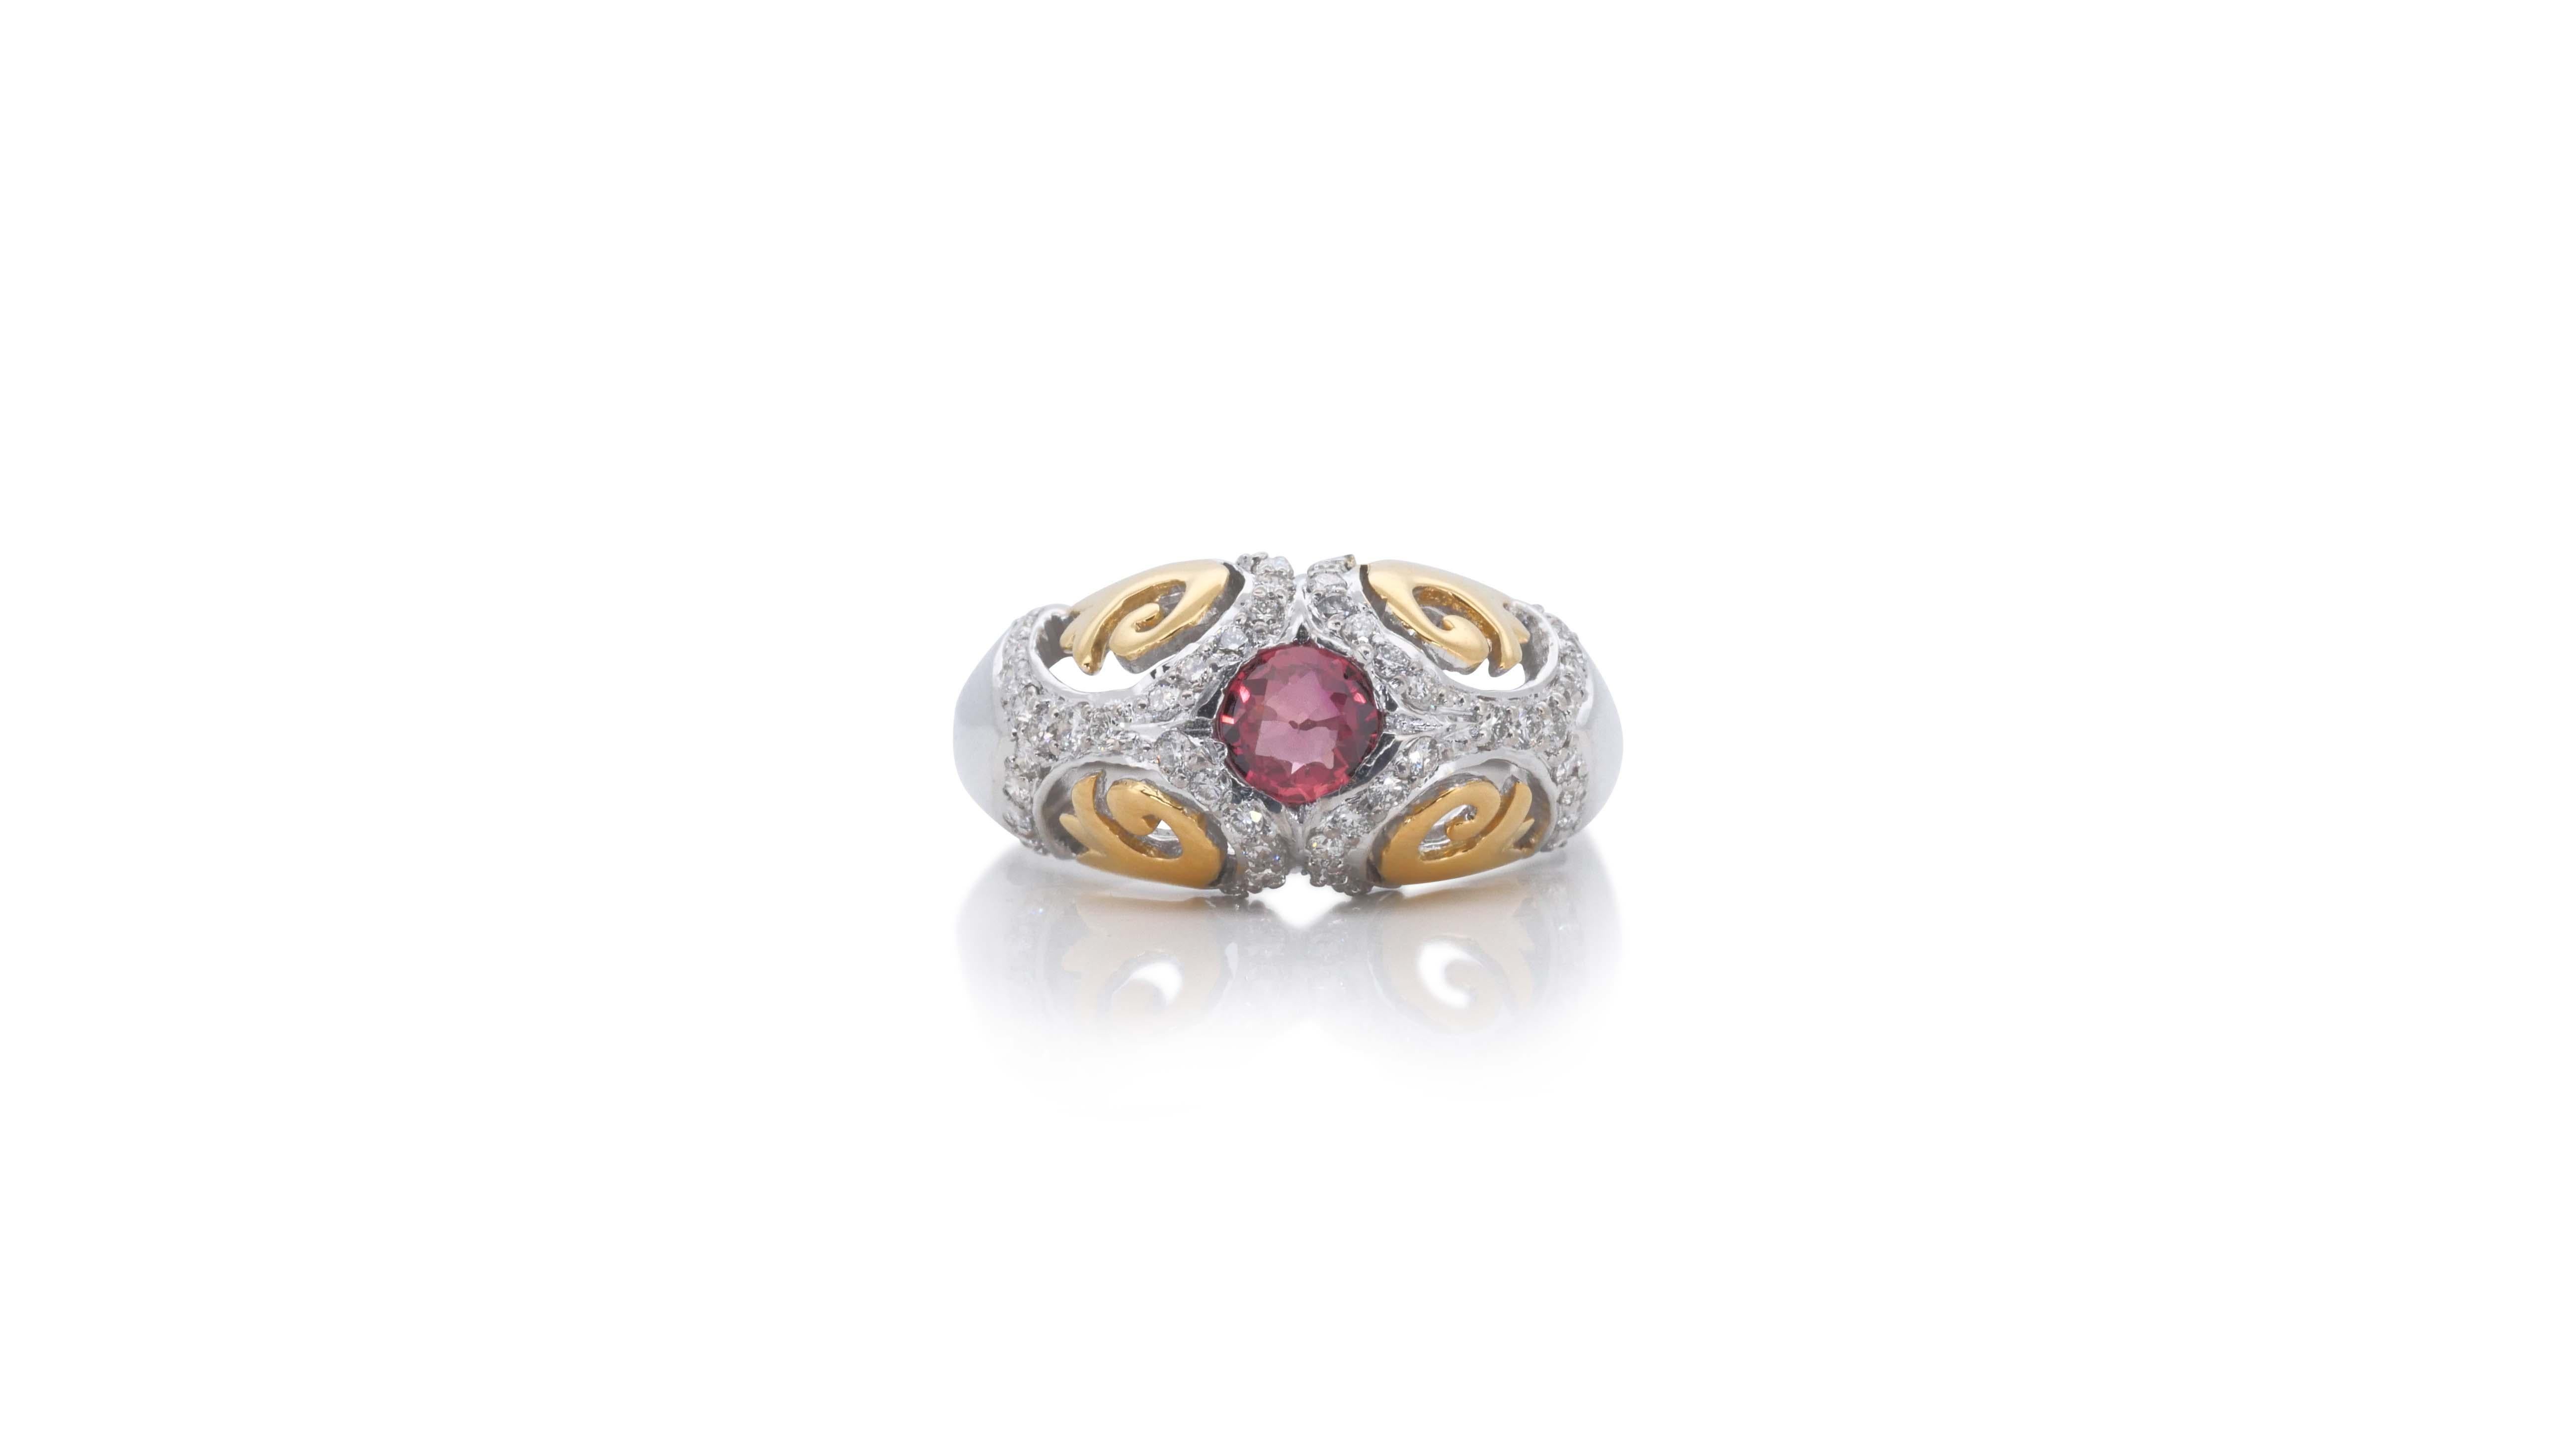 A gorgeous dome ring with a dazzling 0.5 carat  natural ruby. It has 0.46 carat of side diamonds which add more to its elegance. The jewelry is made of 18k white gold and yellow gold with a high quality polish. It comes with a fancy jewelry box.

1